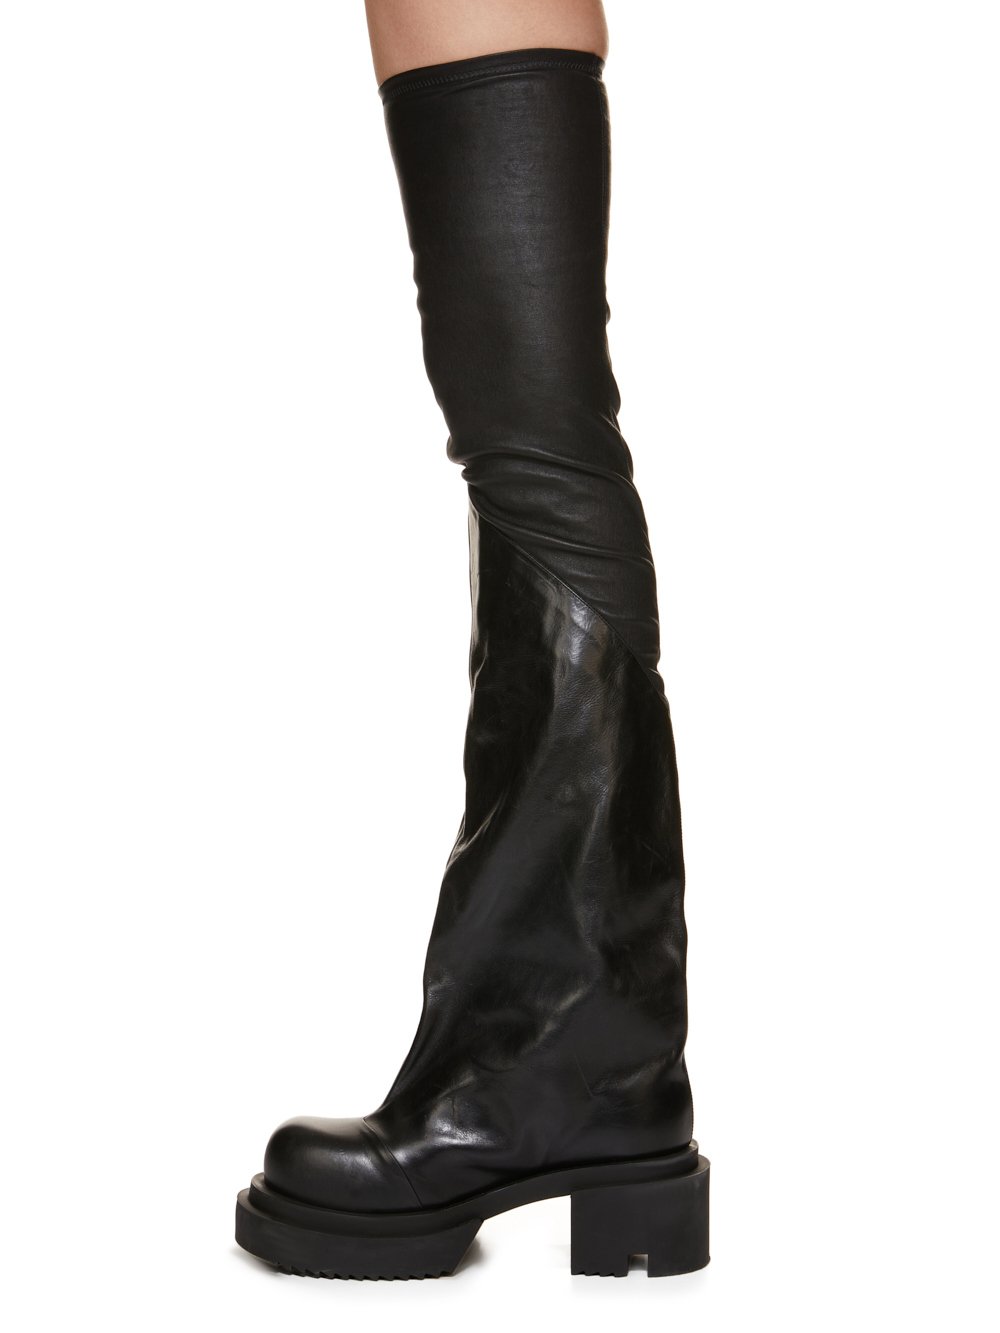 RICK OWENS FW23 LUXOR FLARED BOGUN IN BLACK STRETCH LAMB LEATHER AND GLASLUX, GLOSSY CALF LEATHER